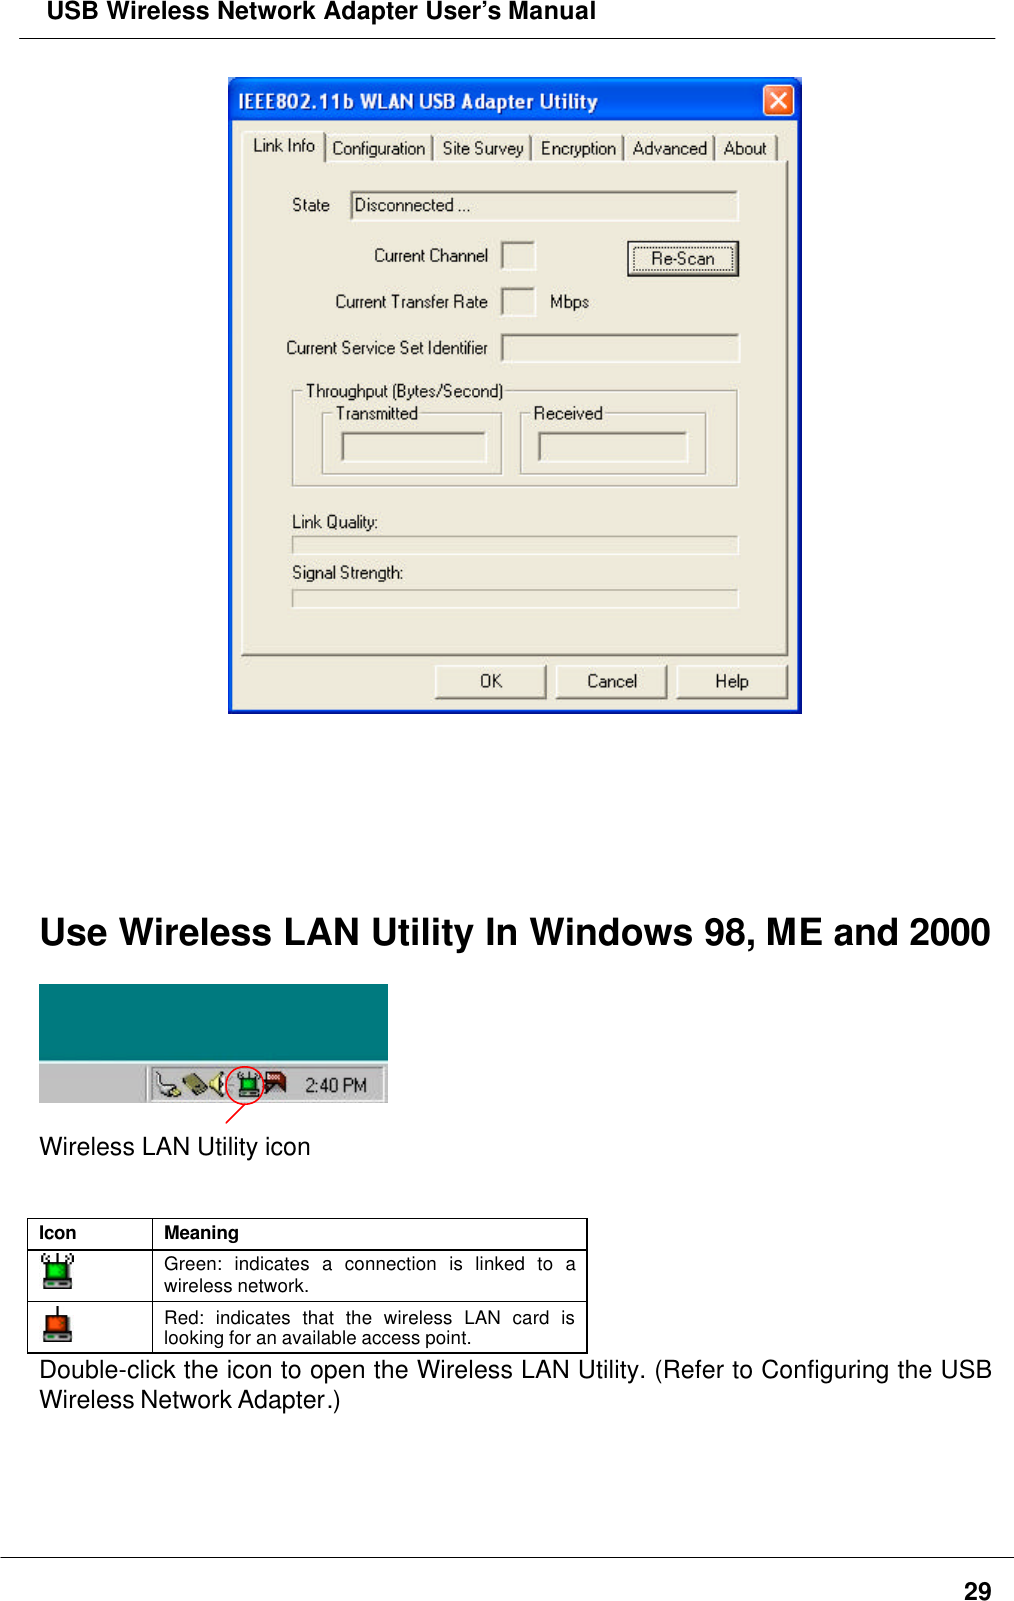  USB Wireless Network Adapter User’s Manual29Use Wireless LAN Utility In Windows 98, ME and 2000Wireless LAN Utility iconIcon MeaningGreen: indicates a connection is linked to awireless network.Red: indicates that the wireless LAN card islooking for an available access point.Double-click the icon to open the Wireless LAN Utility. (Refer to Configuring the USBWireless Network Adapter.)